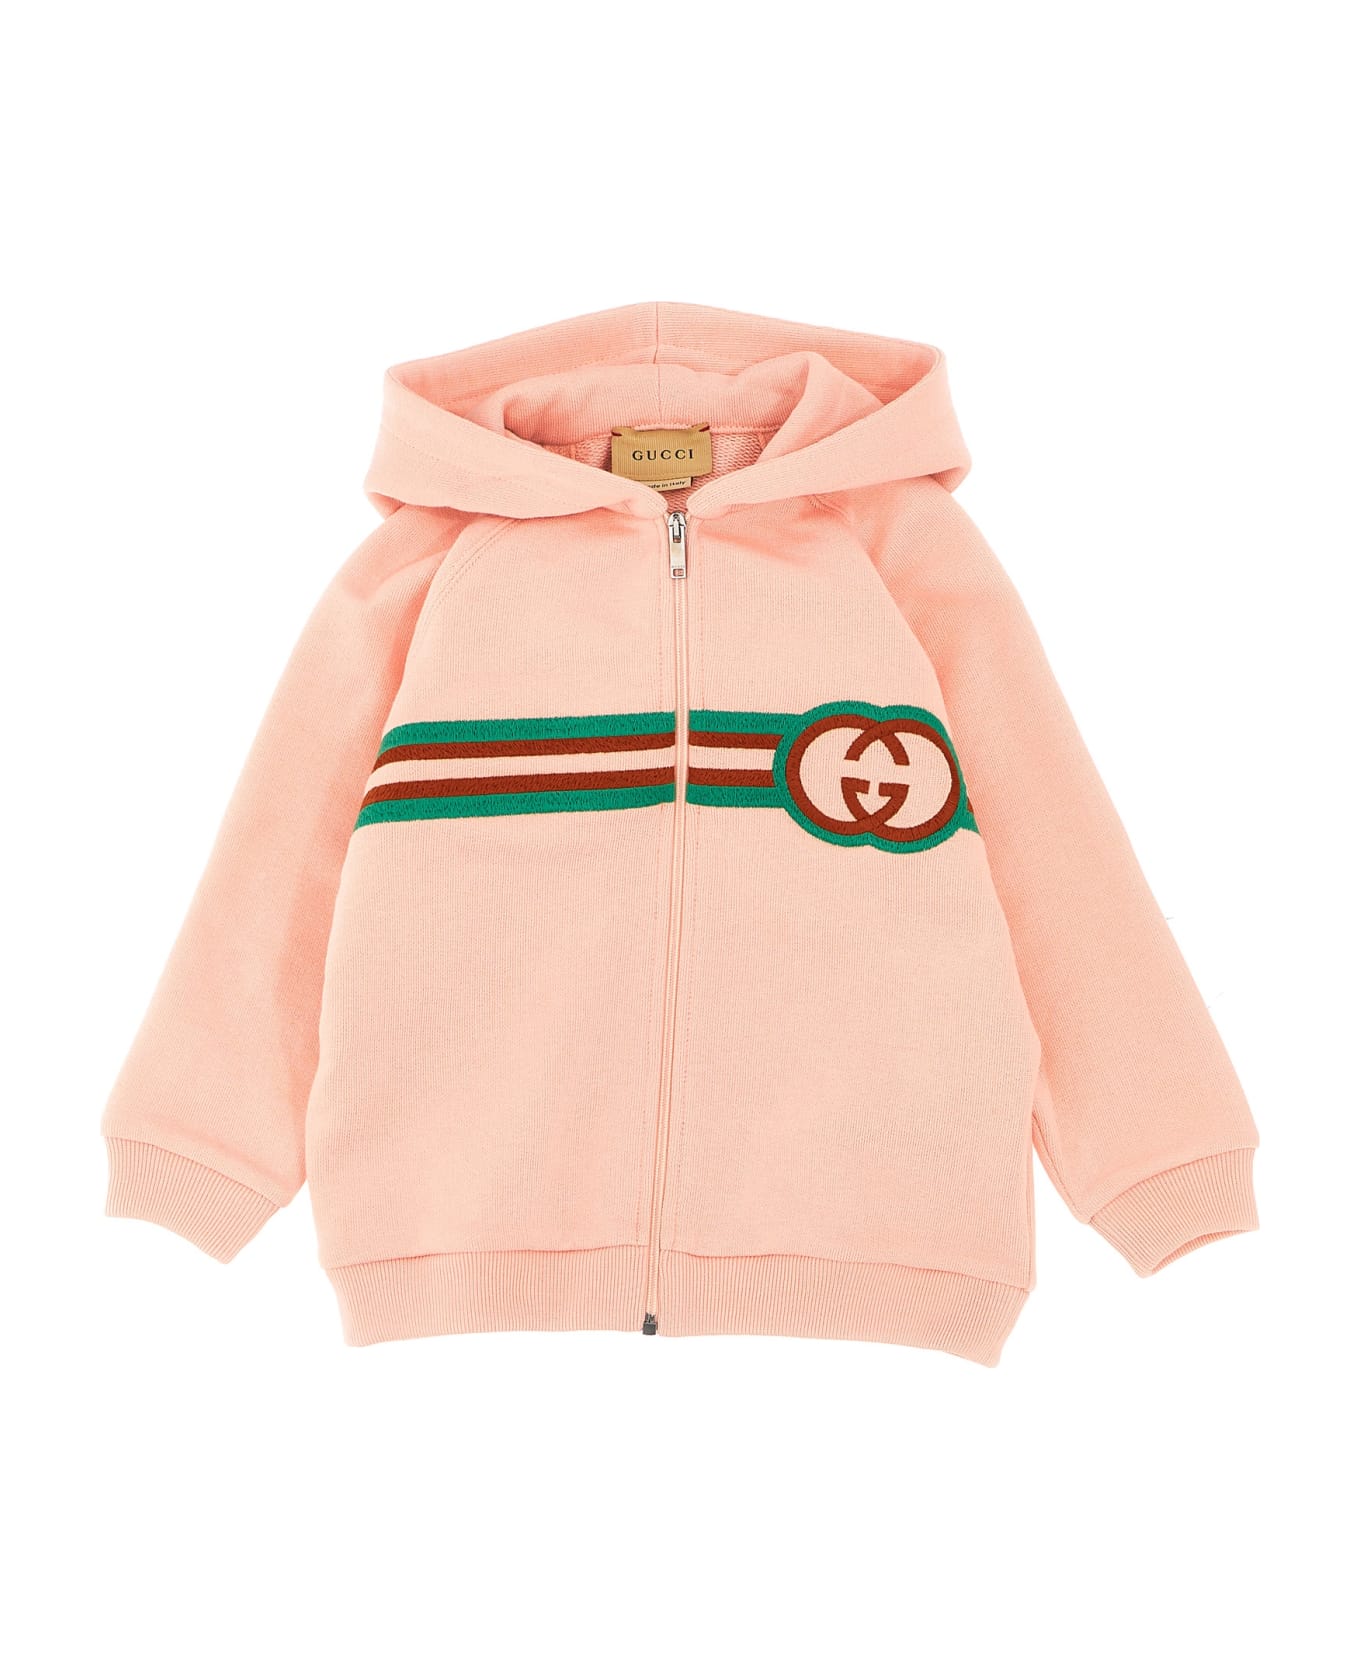 Gucci Logo Embroidery Hoodie - Pink